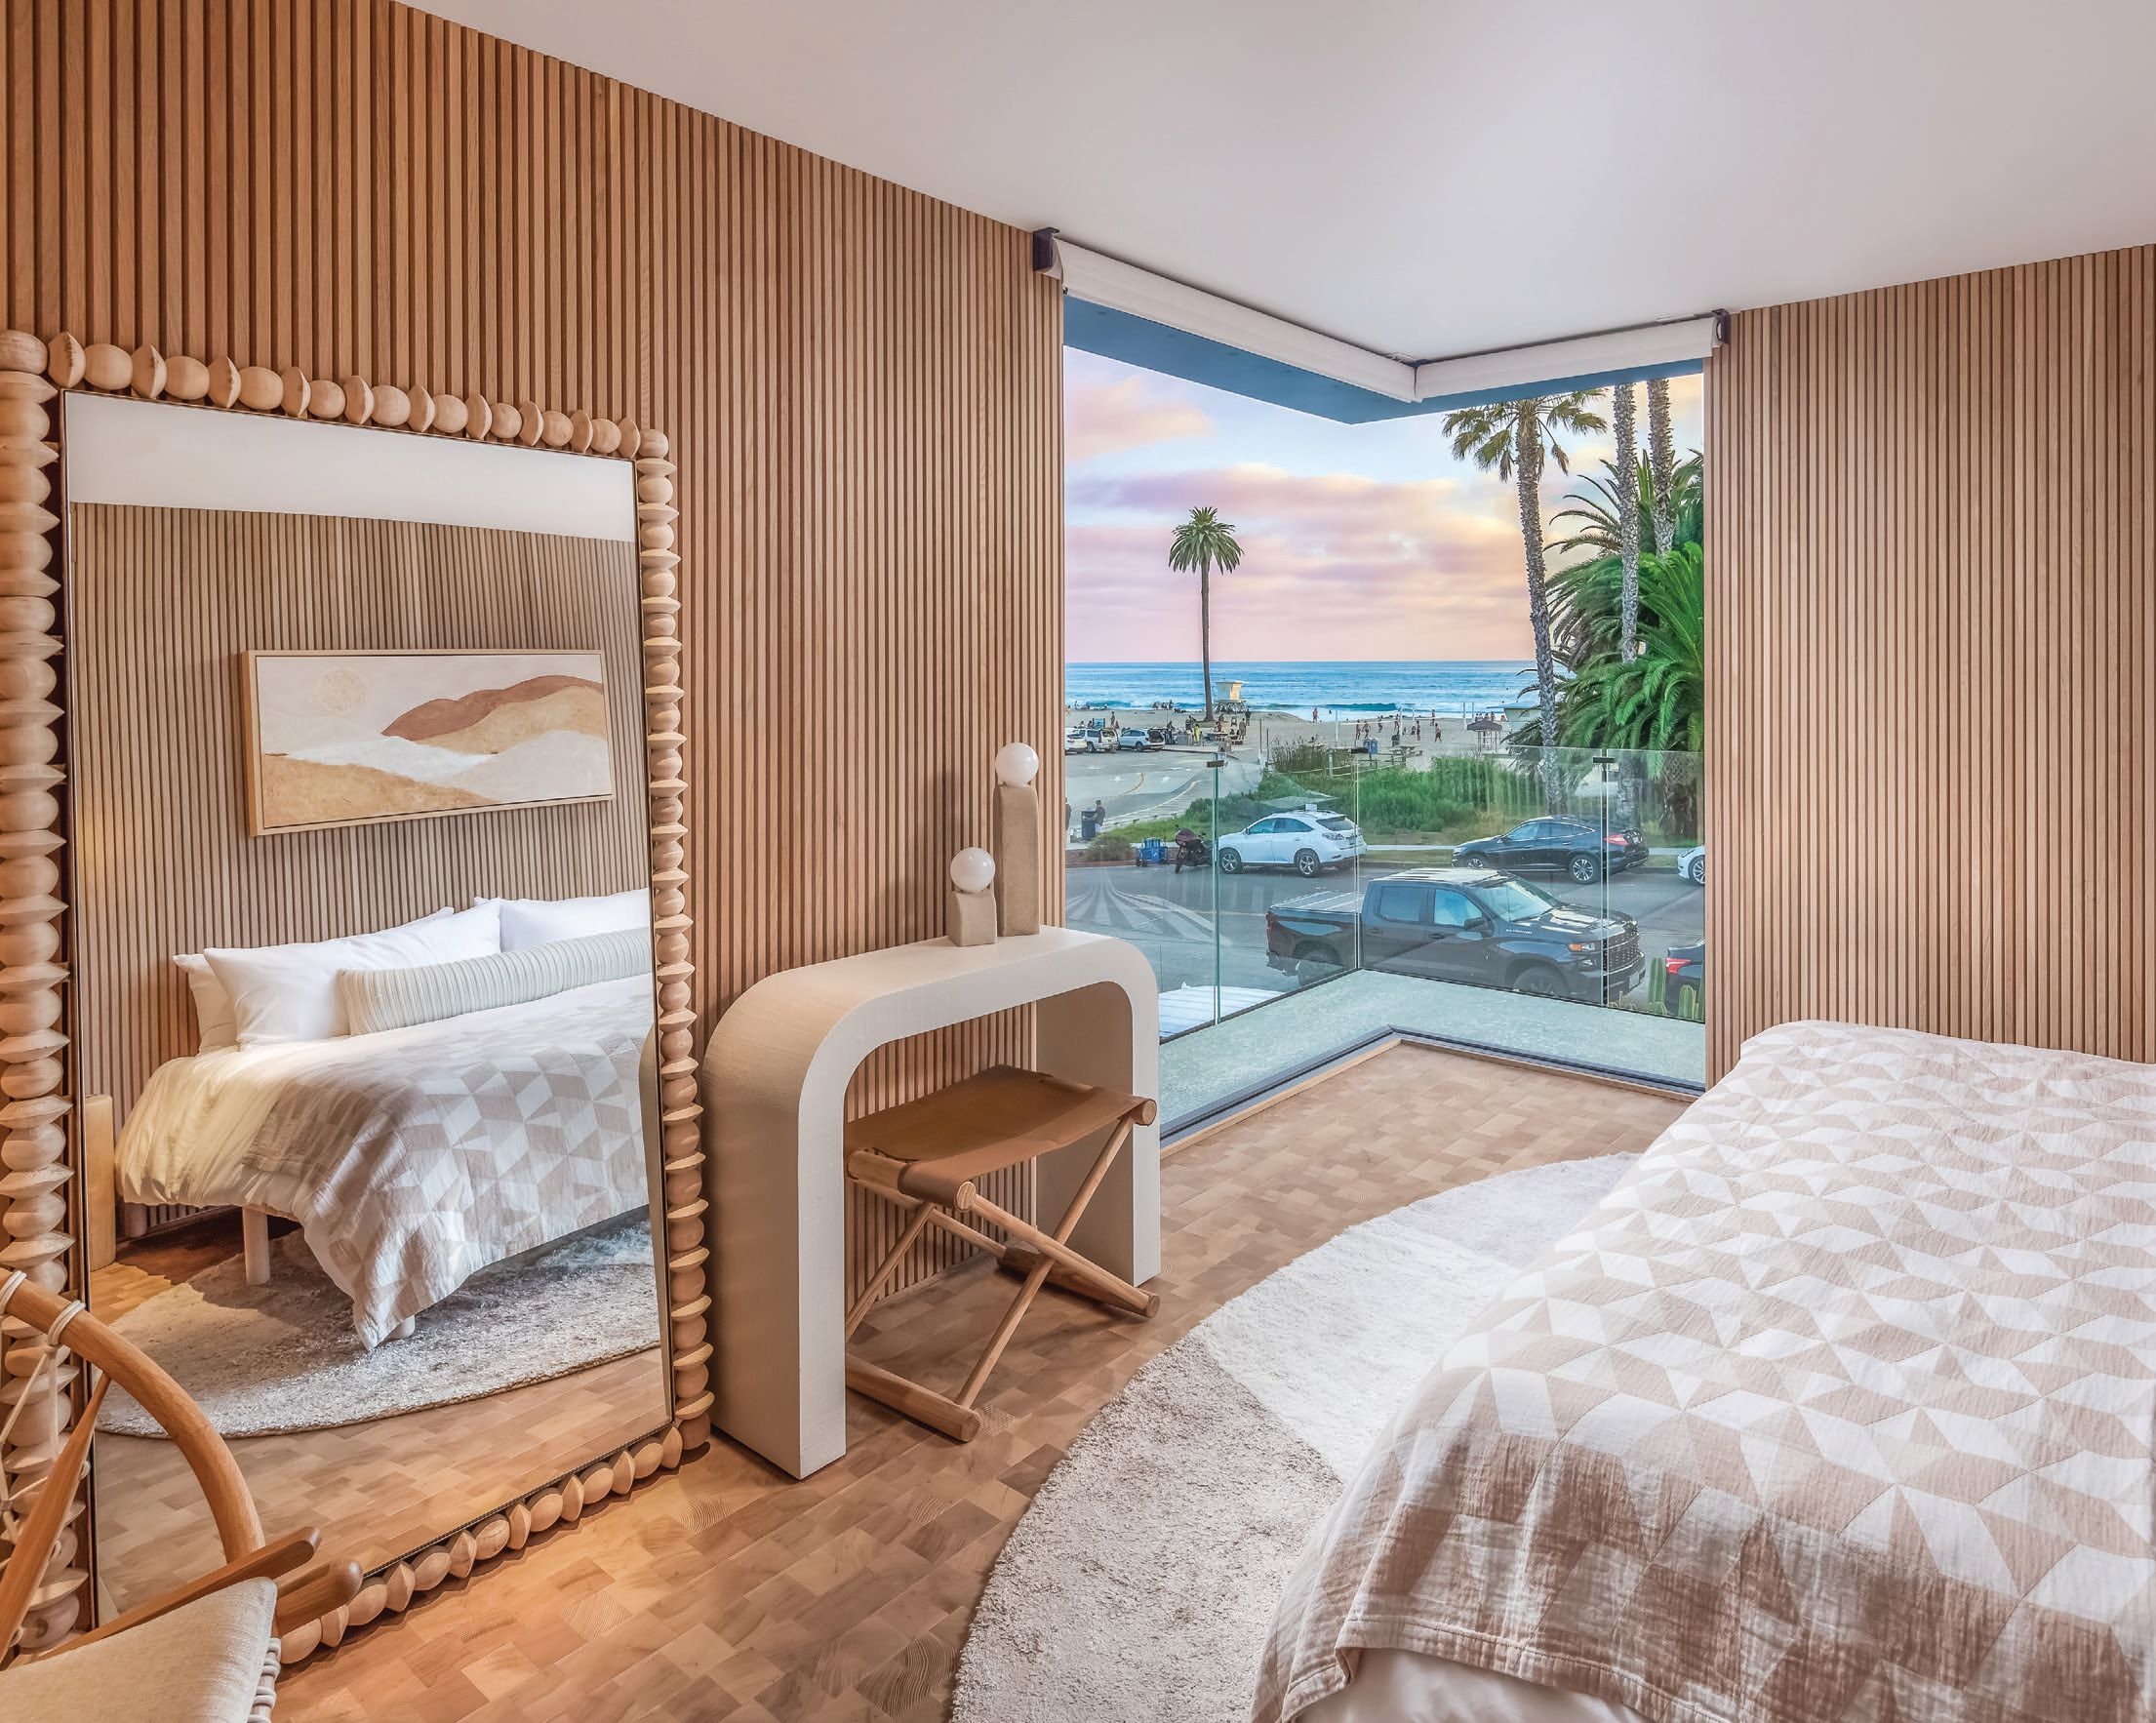 Disappearing walls offer owners prime views of Moonlight Beach from the primary bedroom. PHOTO BY SAM CHEN/ALOHA PHOTOGRAPHY